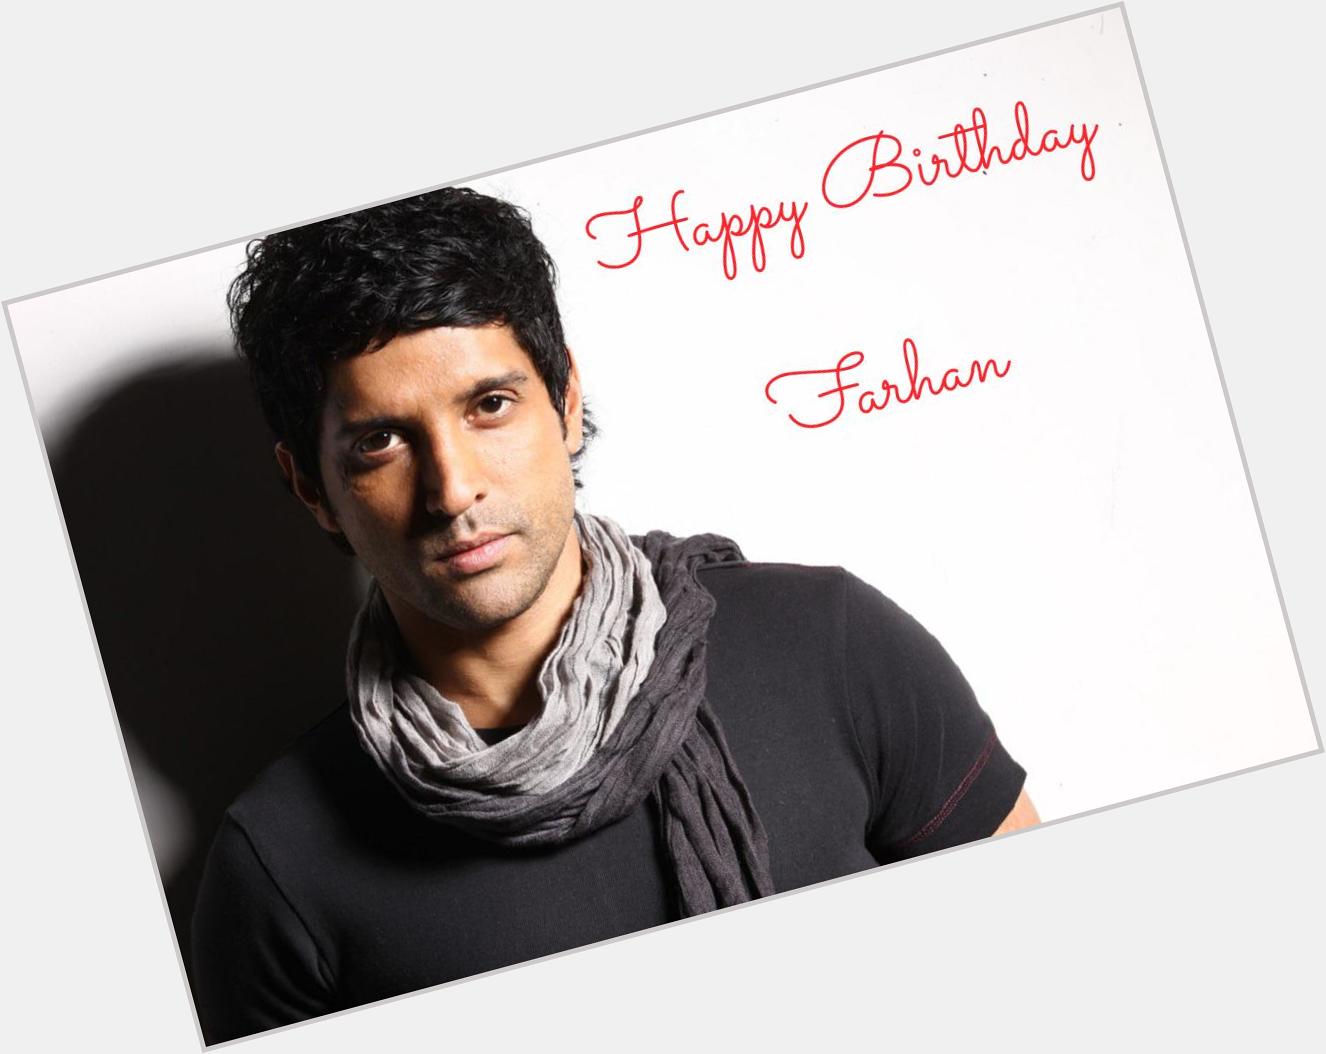 Wishing a very Happy Birthday & all the best for his upcoming movies  